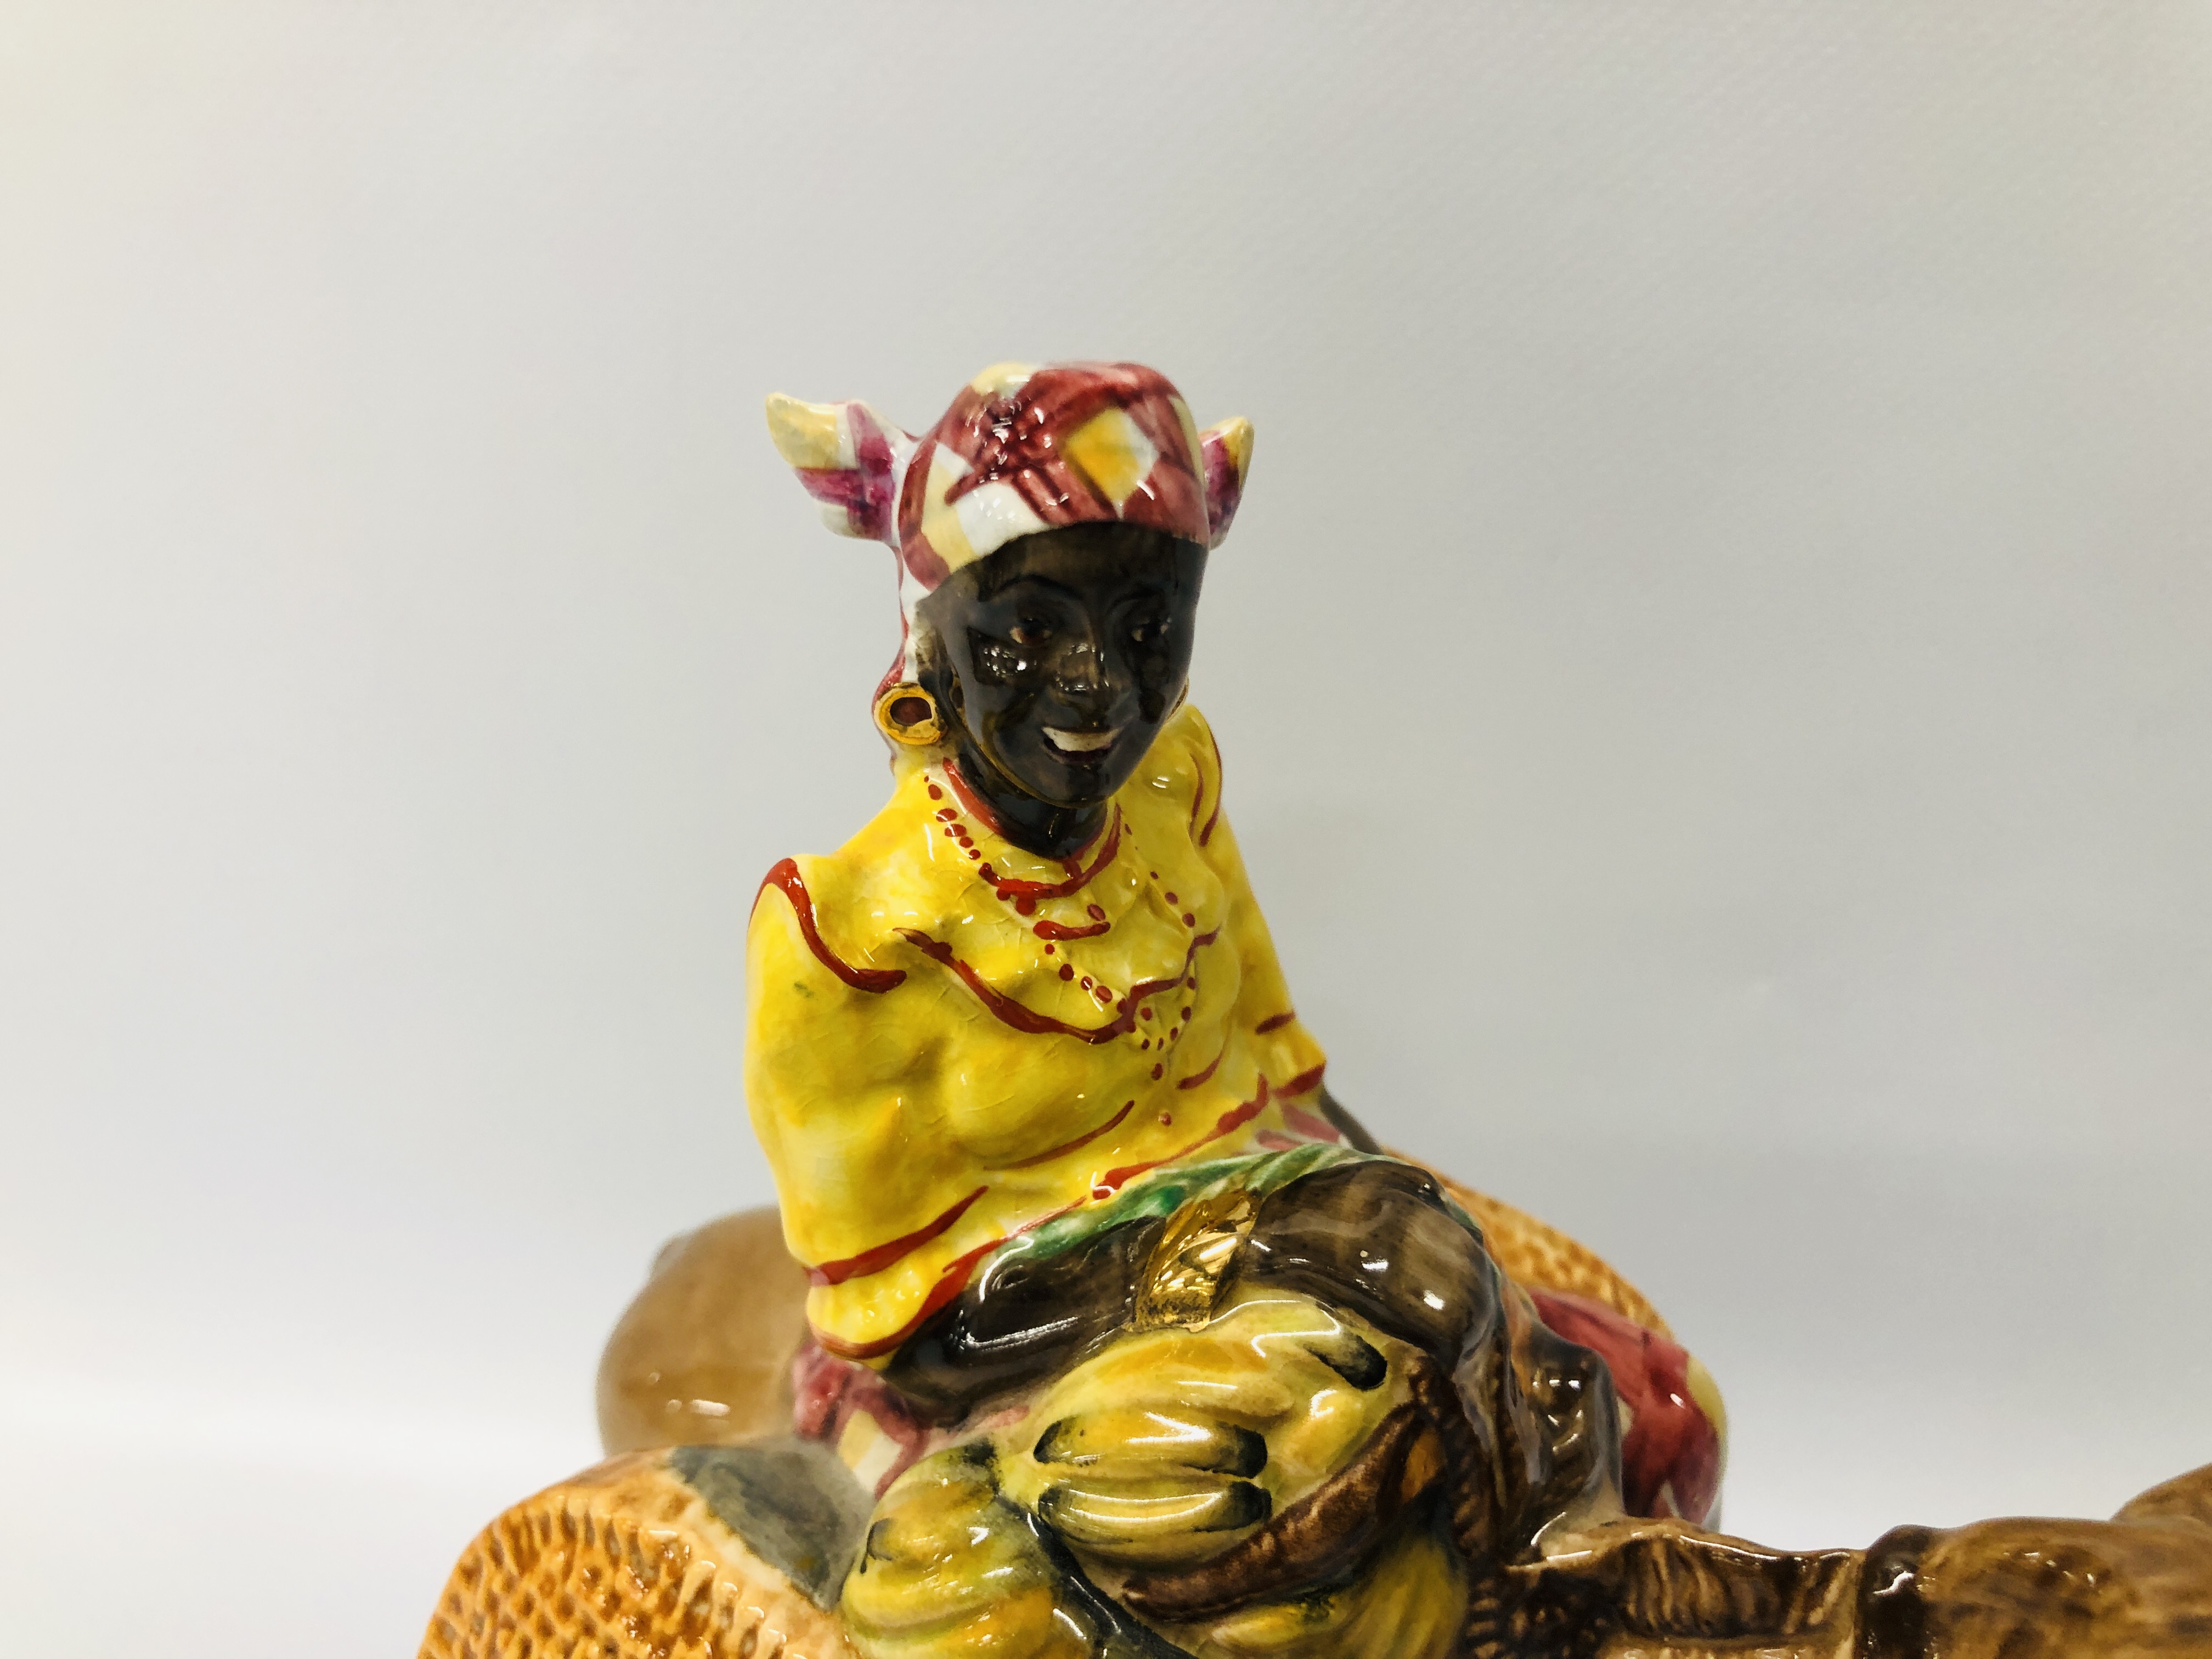 BESWICK "SUSIE JAMAICA" FIGURE ALONG WITH A MINIATURE BESWICK BENEAGLES WHISKY DECANTER (EMPTY) - Image 7 of 13